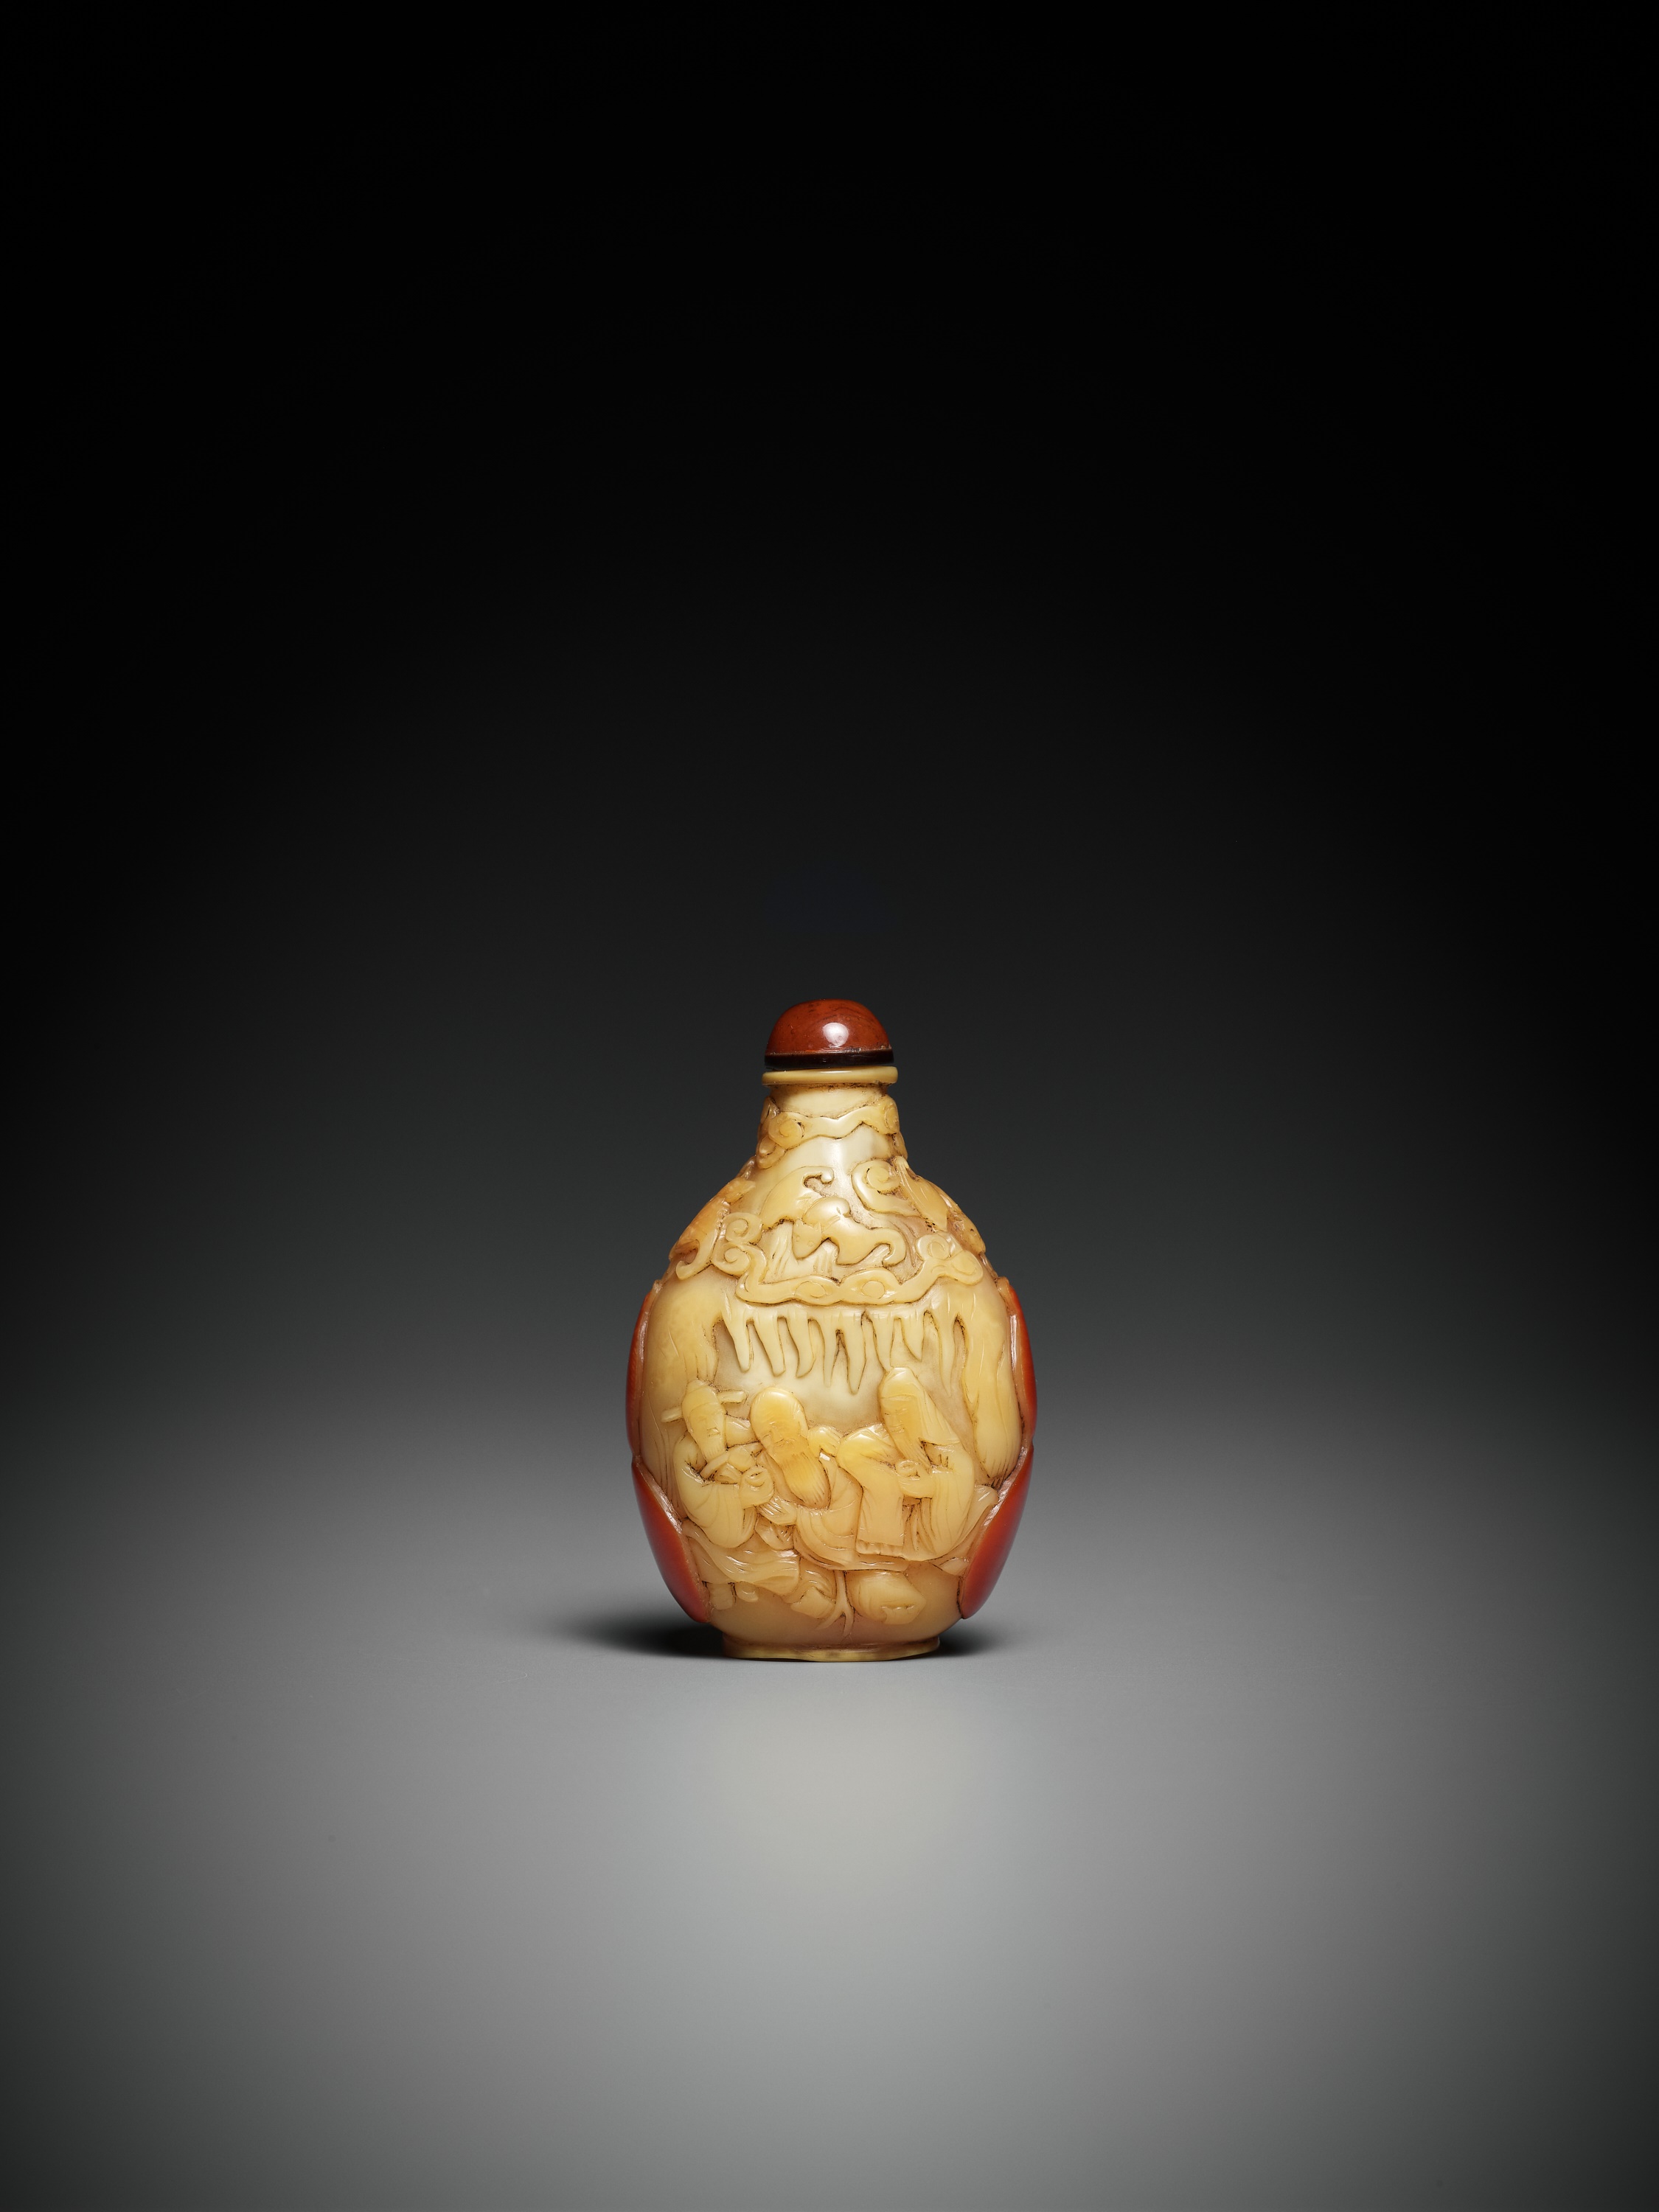 A RARE HORNBILL 'SANXING' SNUFF BOTTLE, EARLY 19TH CENTURY - Image 2 of 11